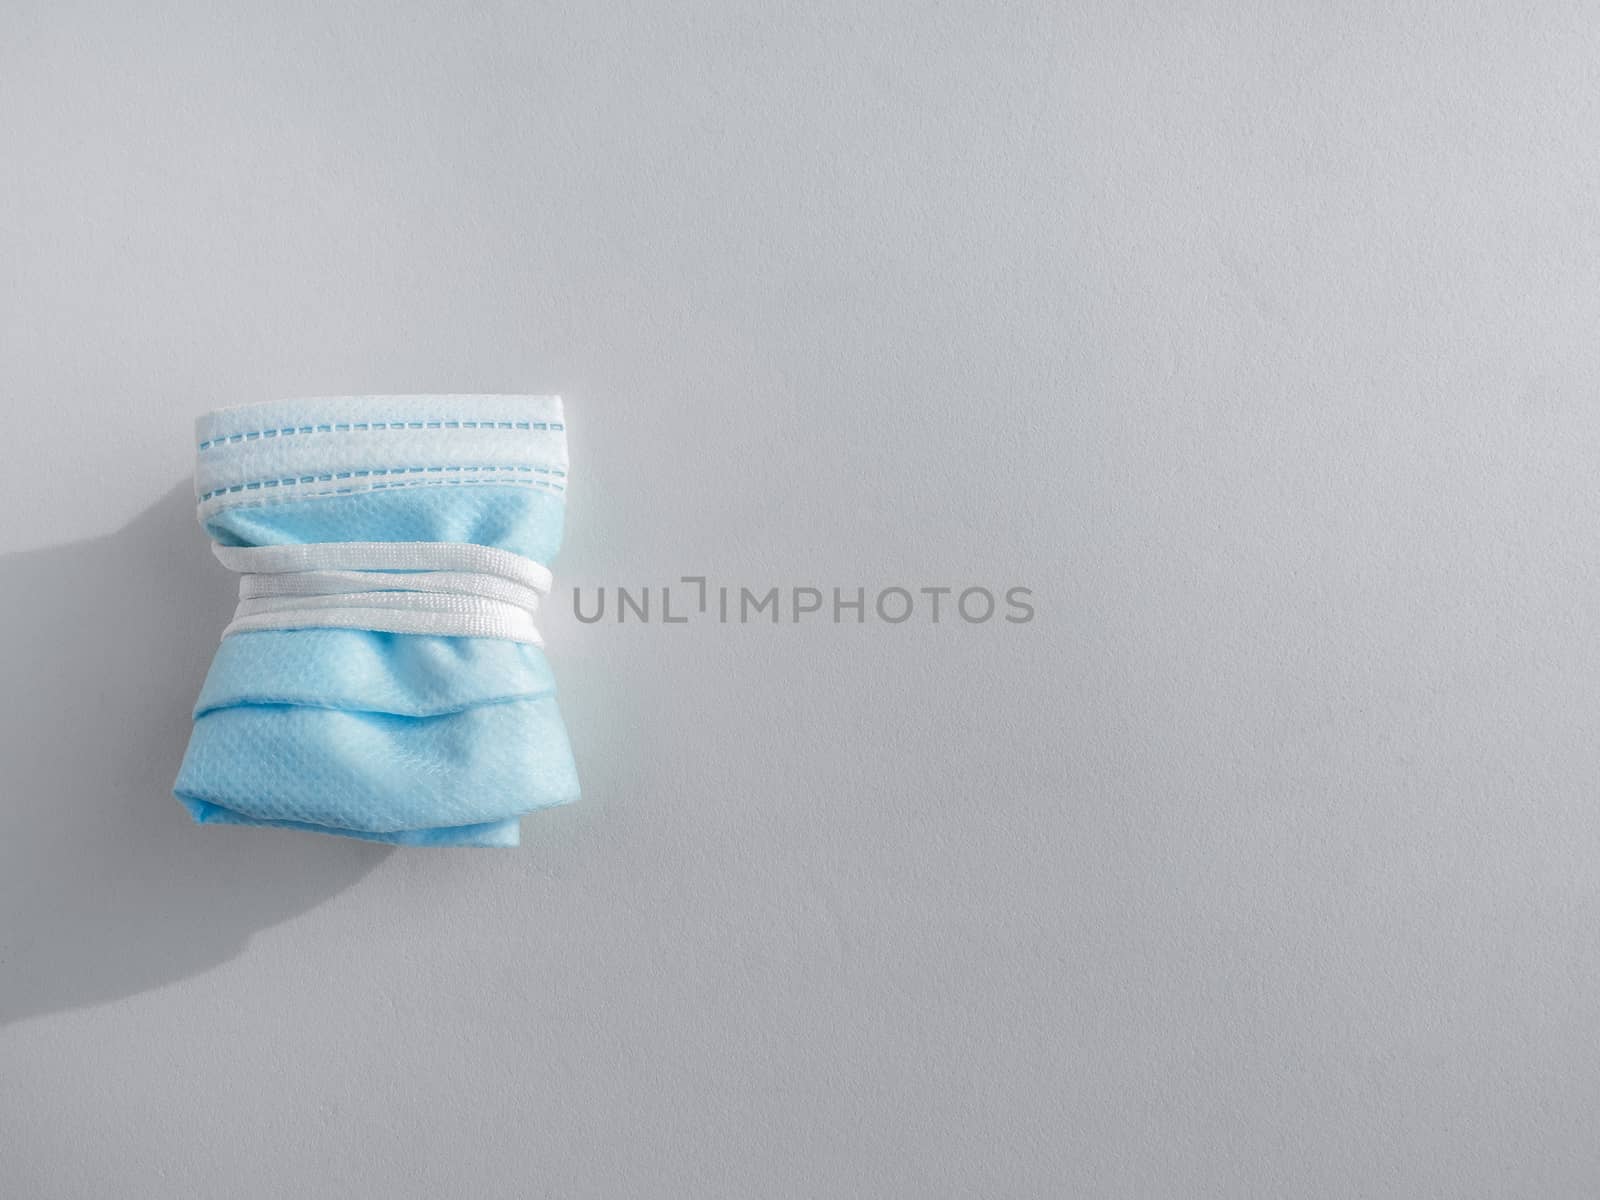 Used mask concept. Folded used protective face mask isolated on white background with copy space. Protection before littering for prevent spread of virus.